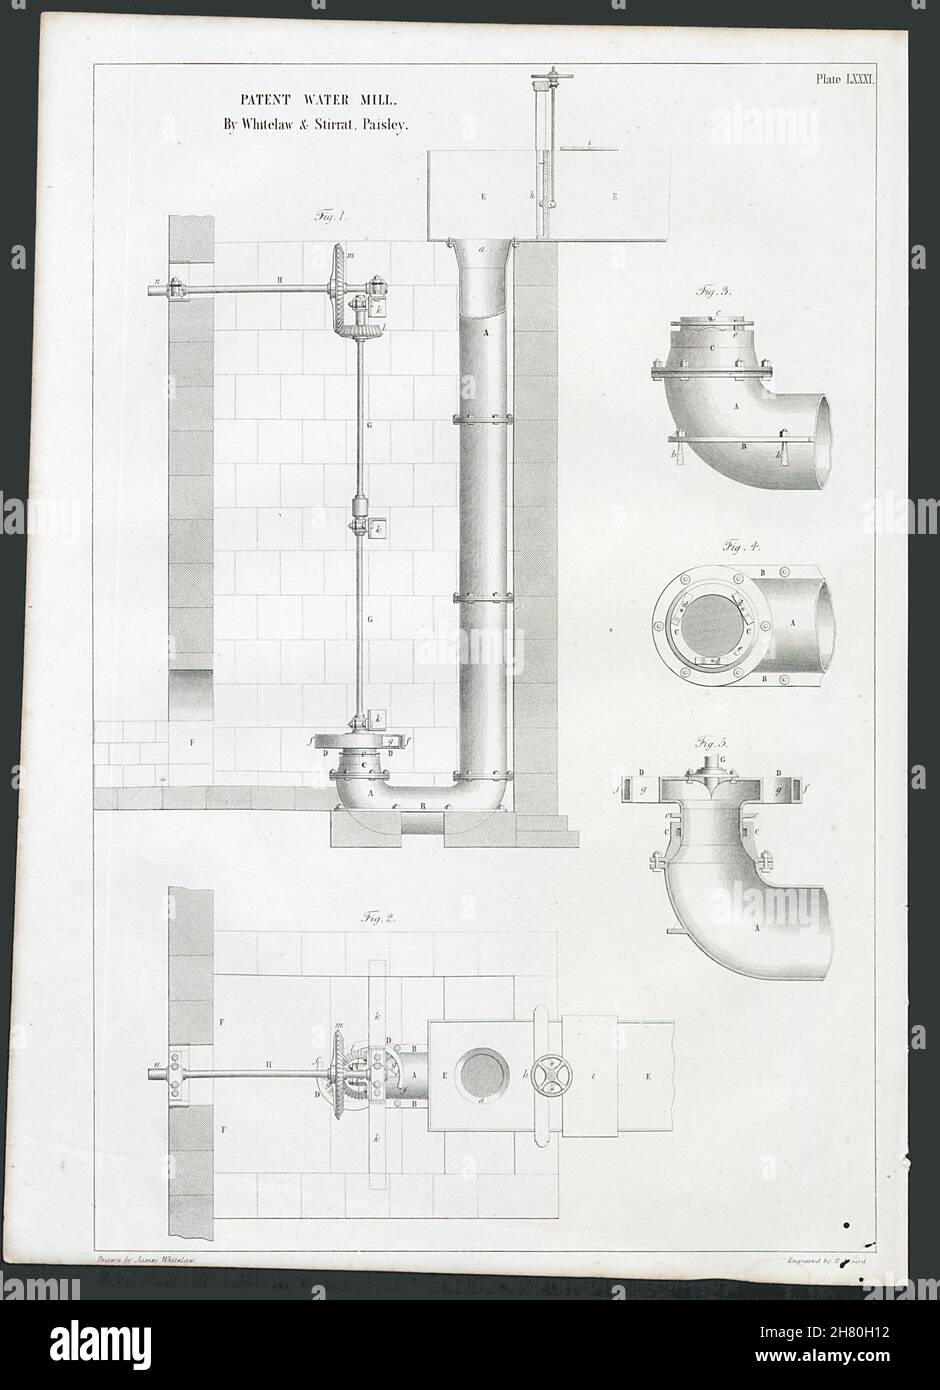 VICTORIAN ENGINEERING DRAWING Patent water mill. Whitelaw & Stirrat Paisley 1847 Stock Photo